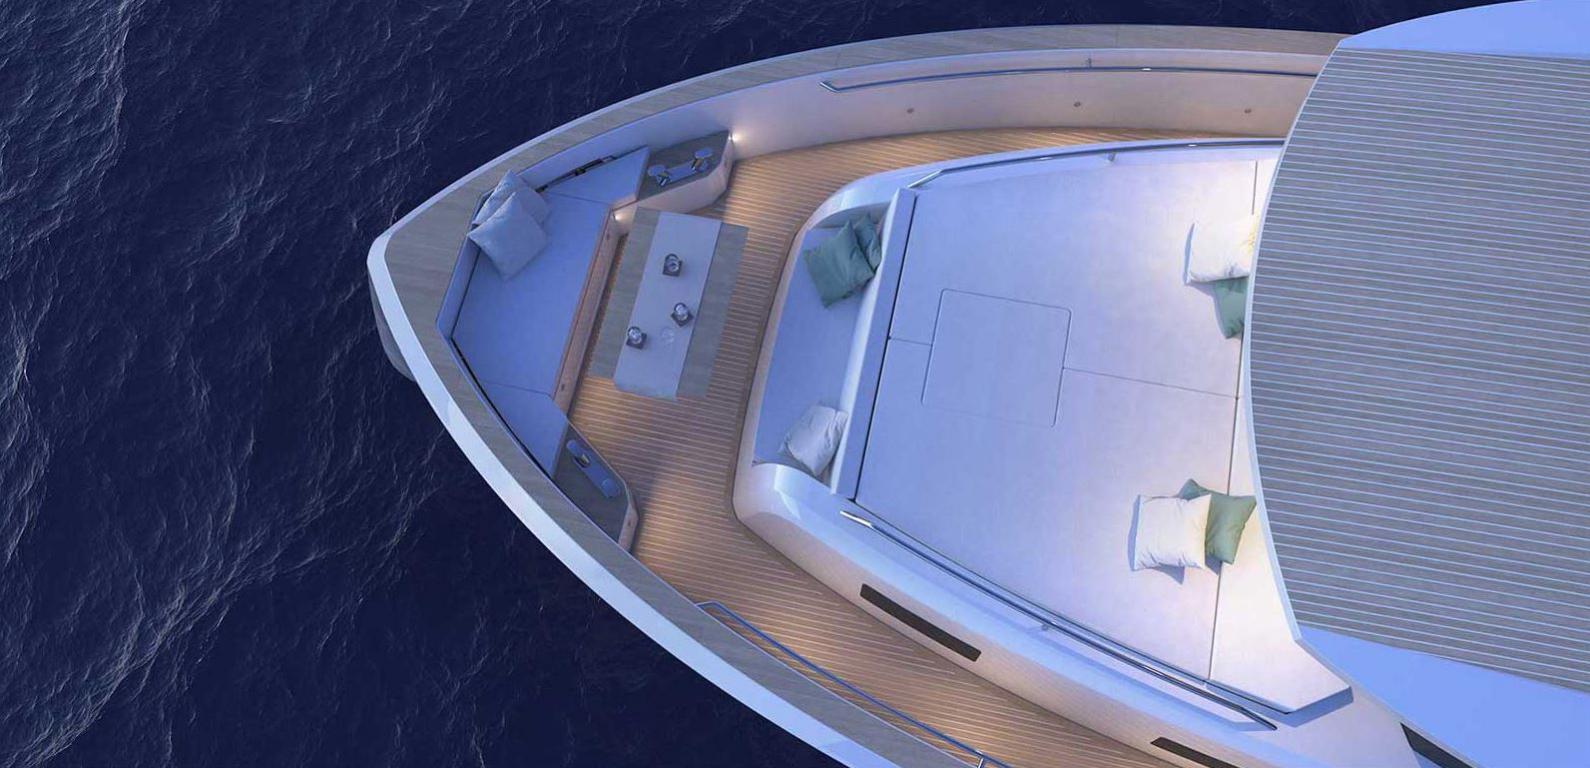 Pardo 60 deck view from above - Lucker Yachts